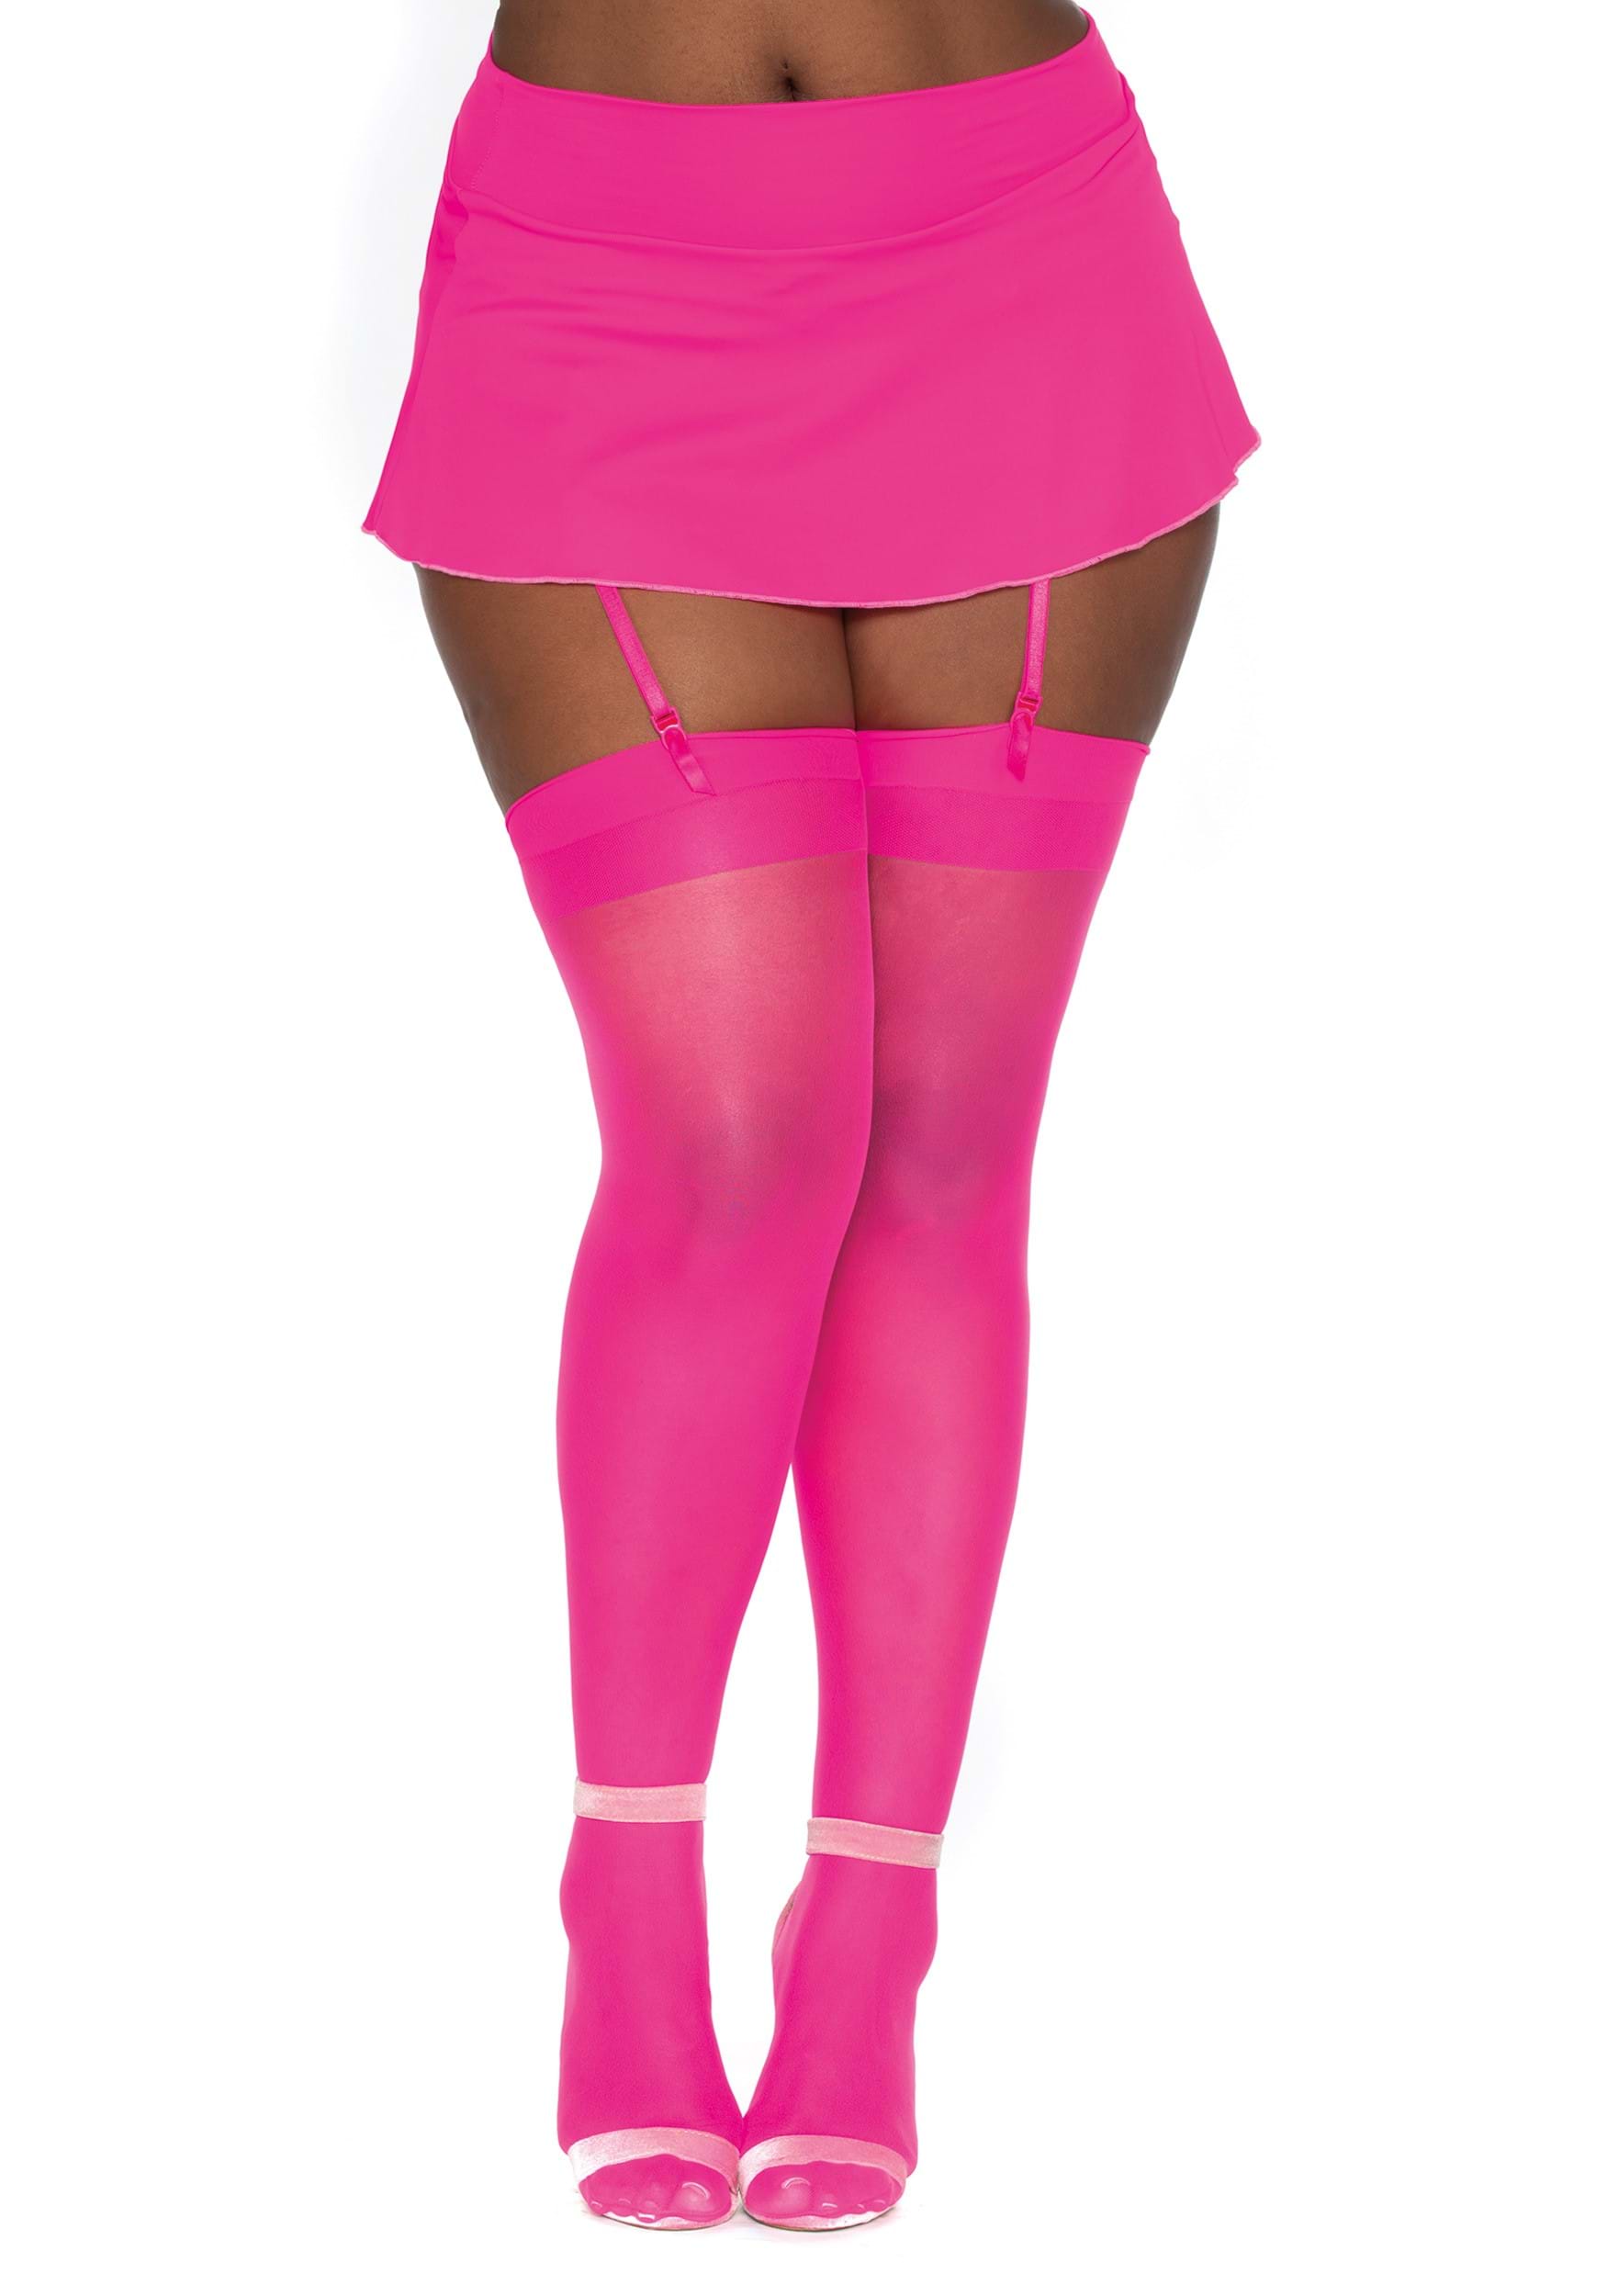 Plus Size Solid Pink Tights for Women